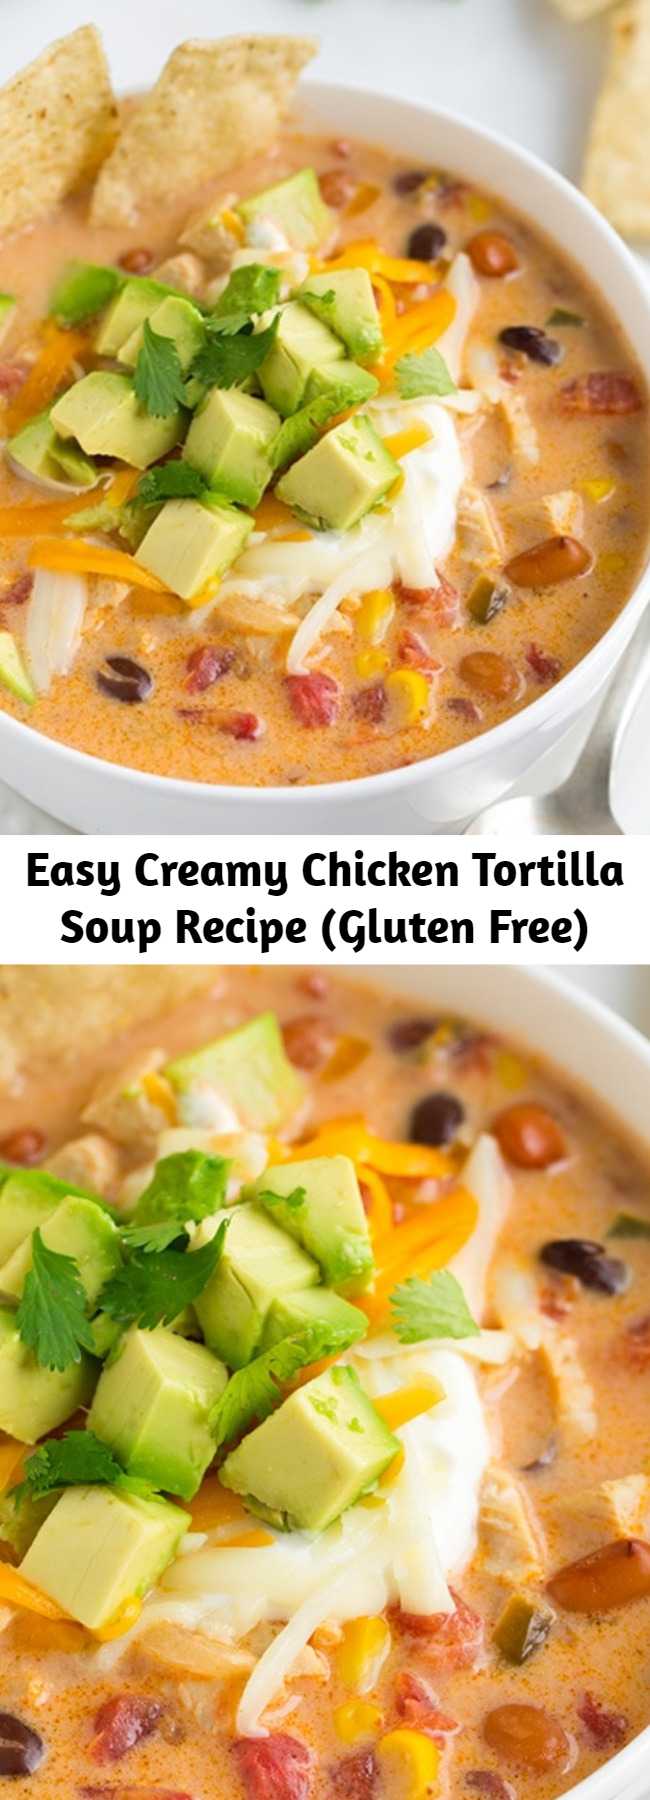 Easy Creamy Chicken Tortilla Soup Recipe (Gluten Free) - A hearty, warming and comforting soup made with juicy chicken, vegetables and loaded with delicious toppings. Best of all this soup is whipped up in around 30 minutes and couldn’t be easier!